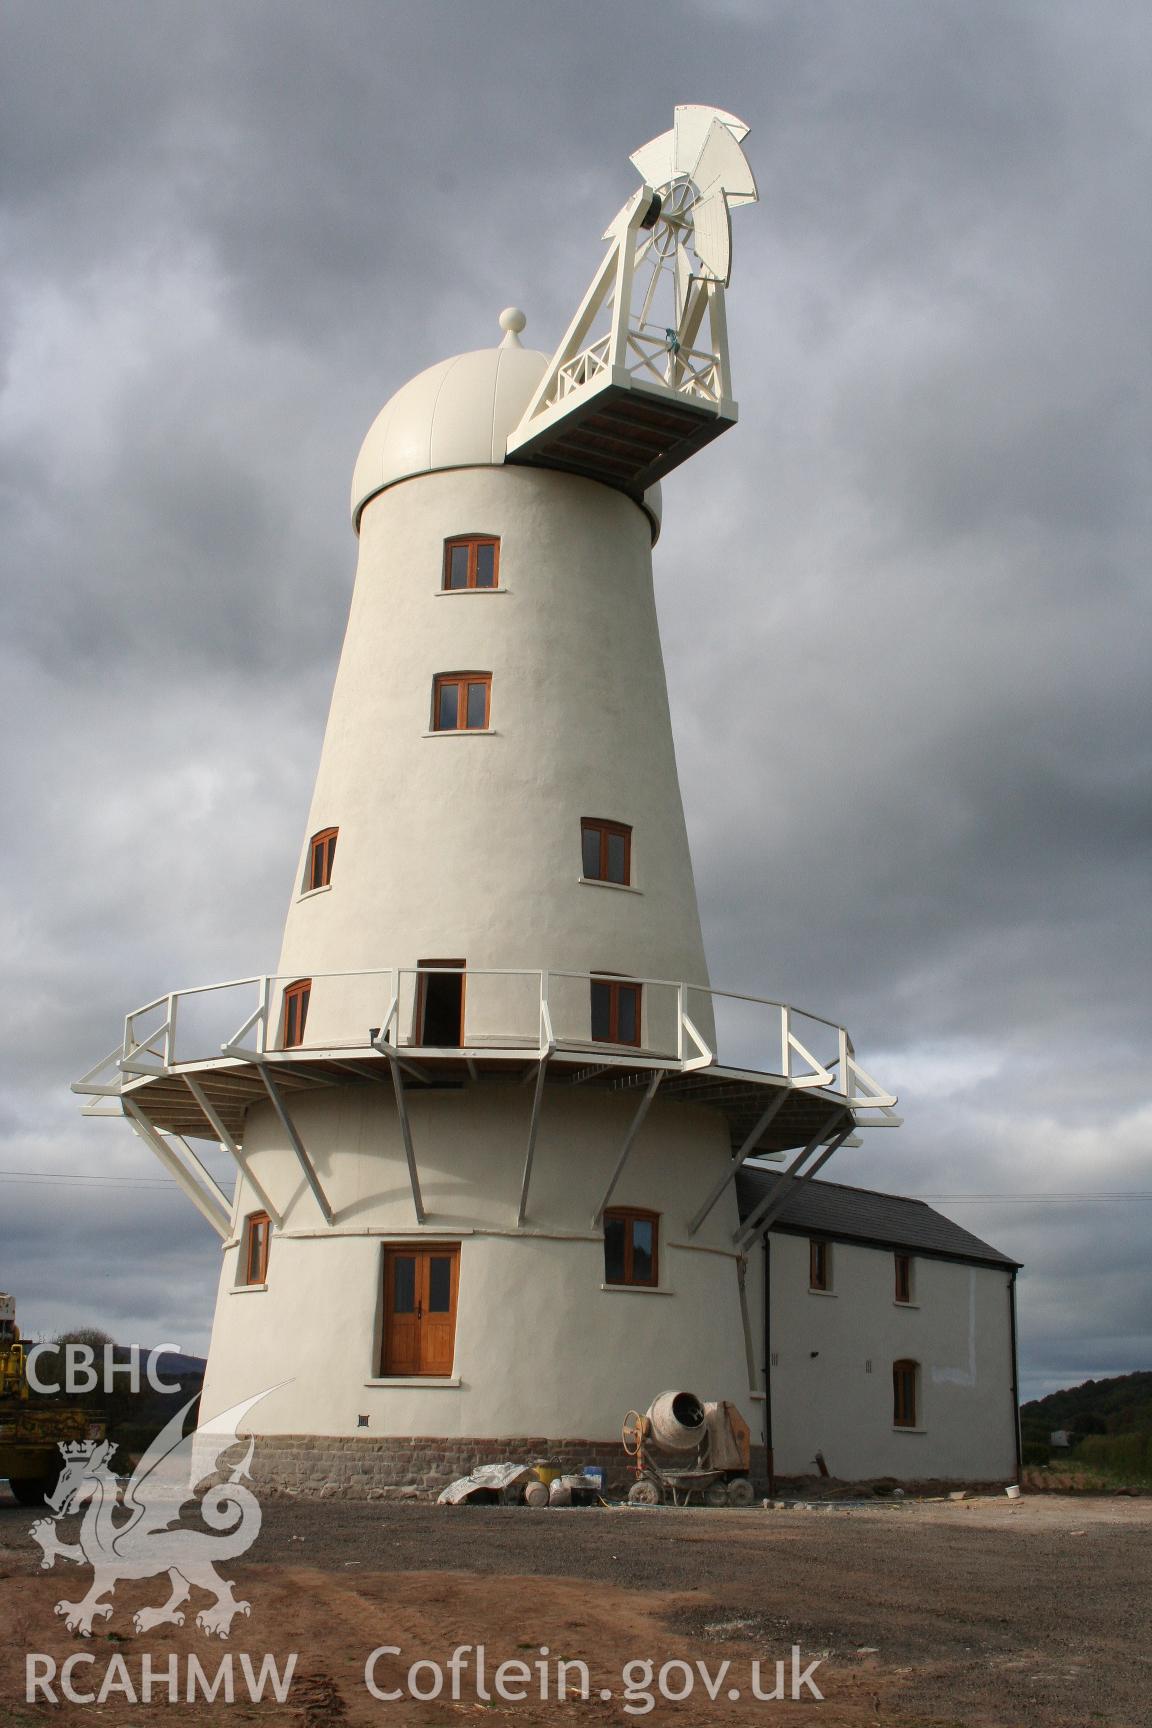 View of Llancayo Windmill from the southeast, taken by Brian Malaws on 18 October 2008.